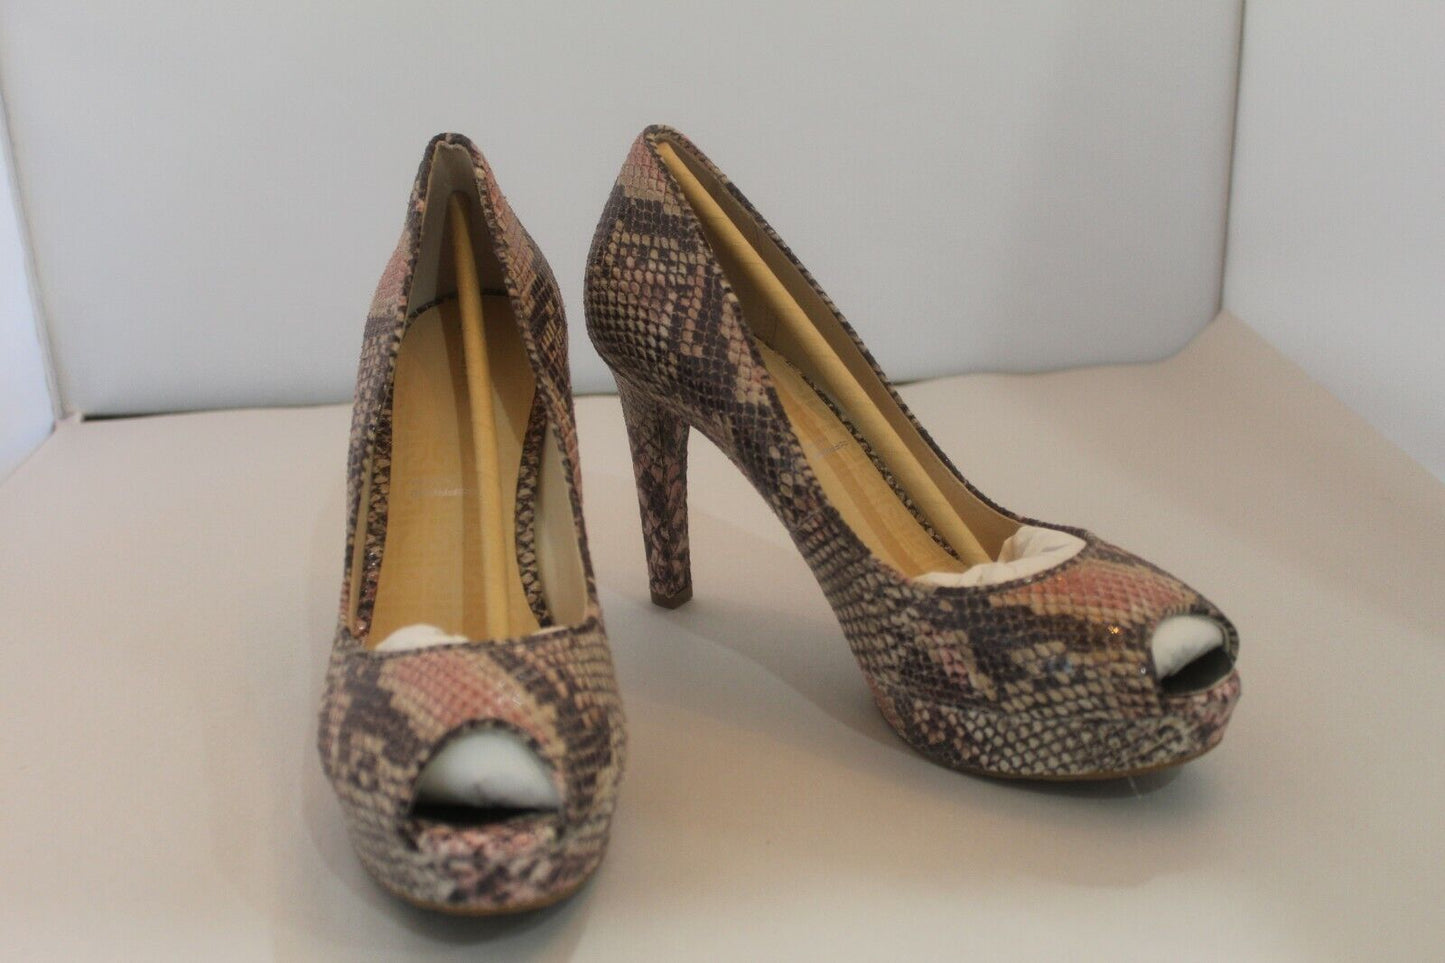 ROCKPORT Ladies Shoes High Stiletto Mary Jane Style Leather Snake Print Size 8.5